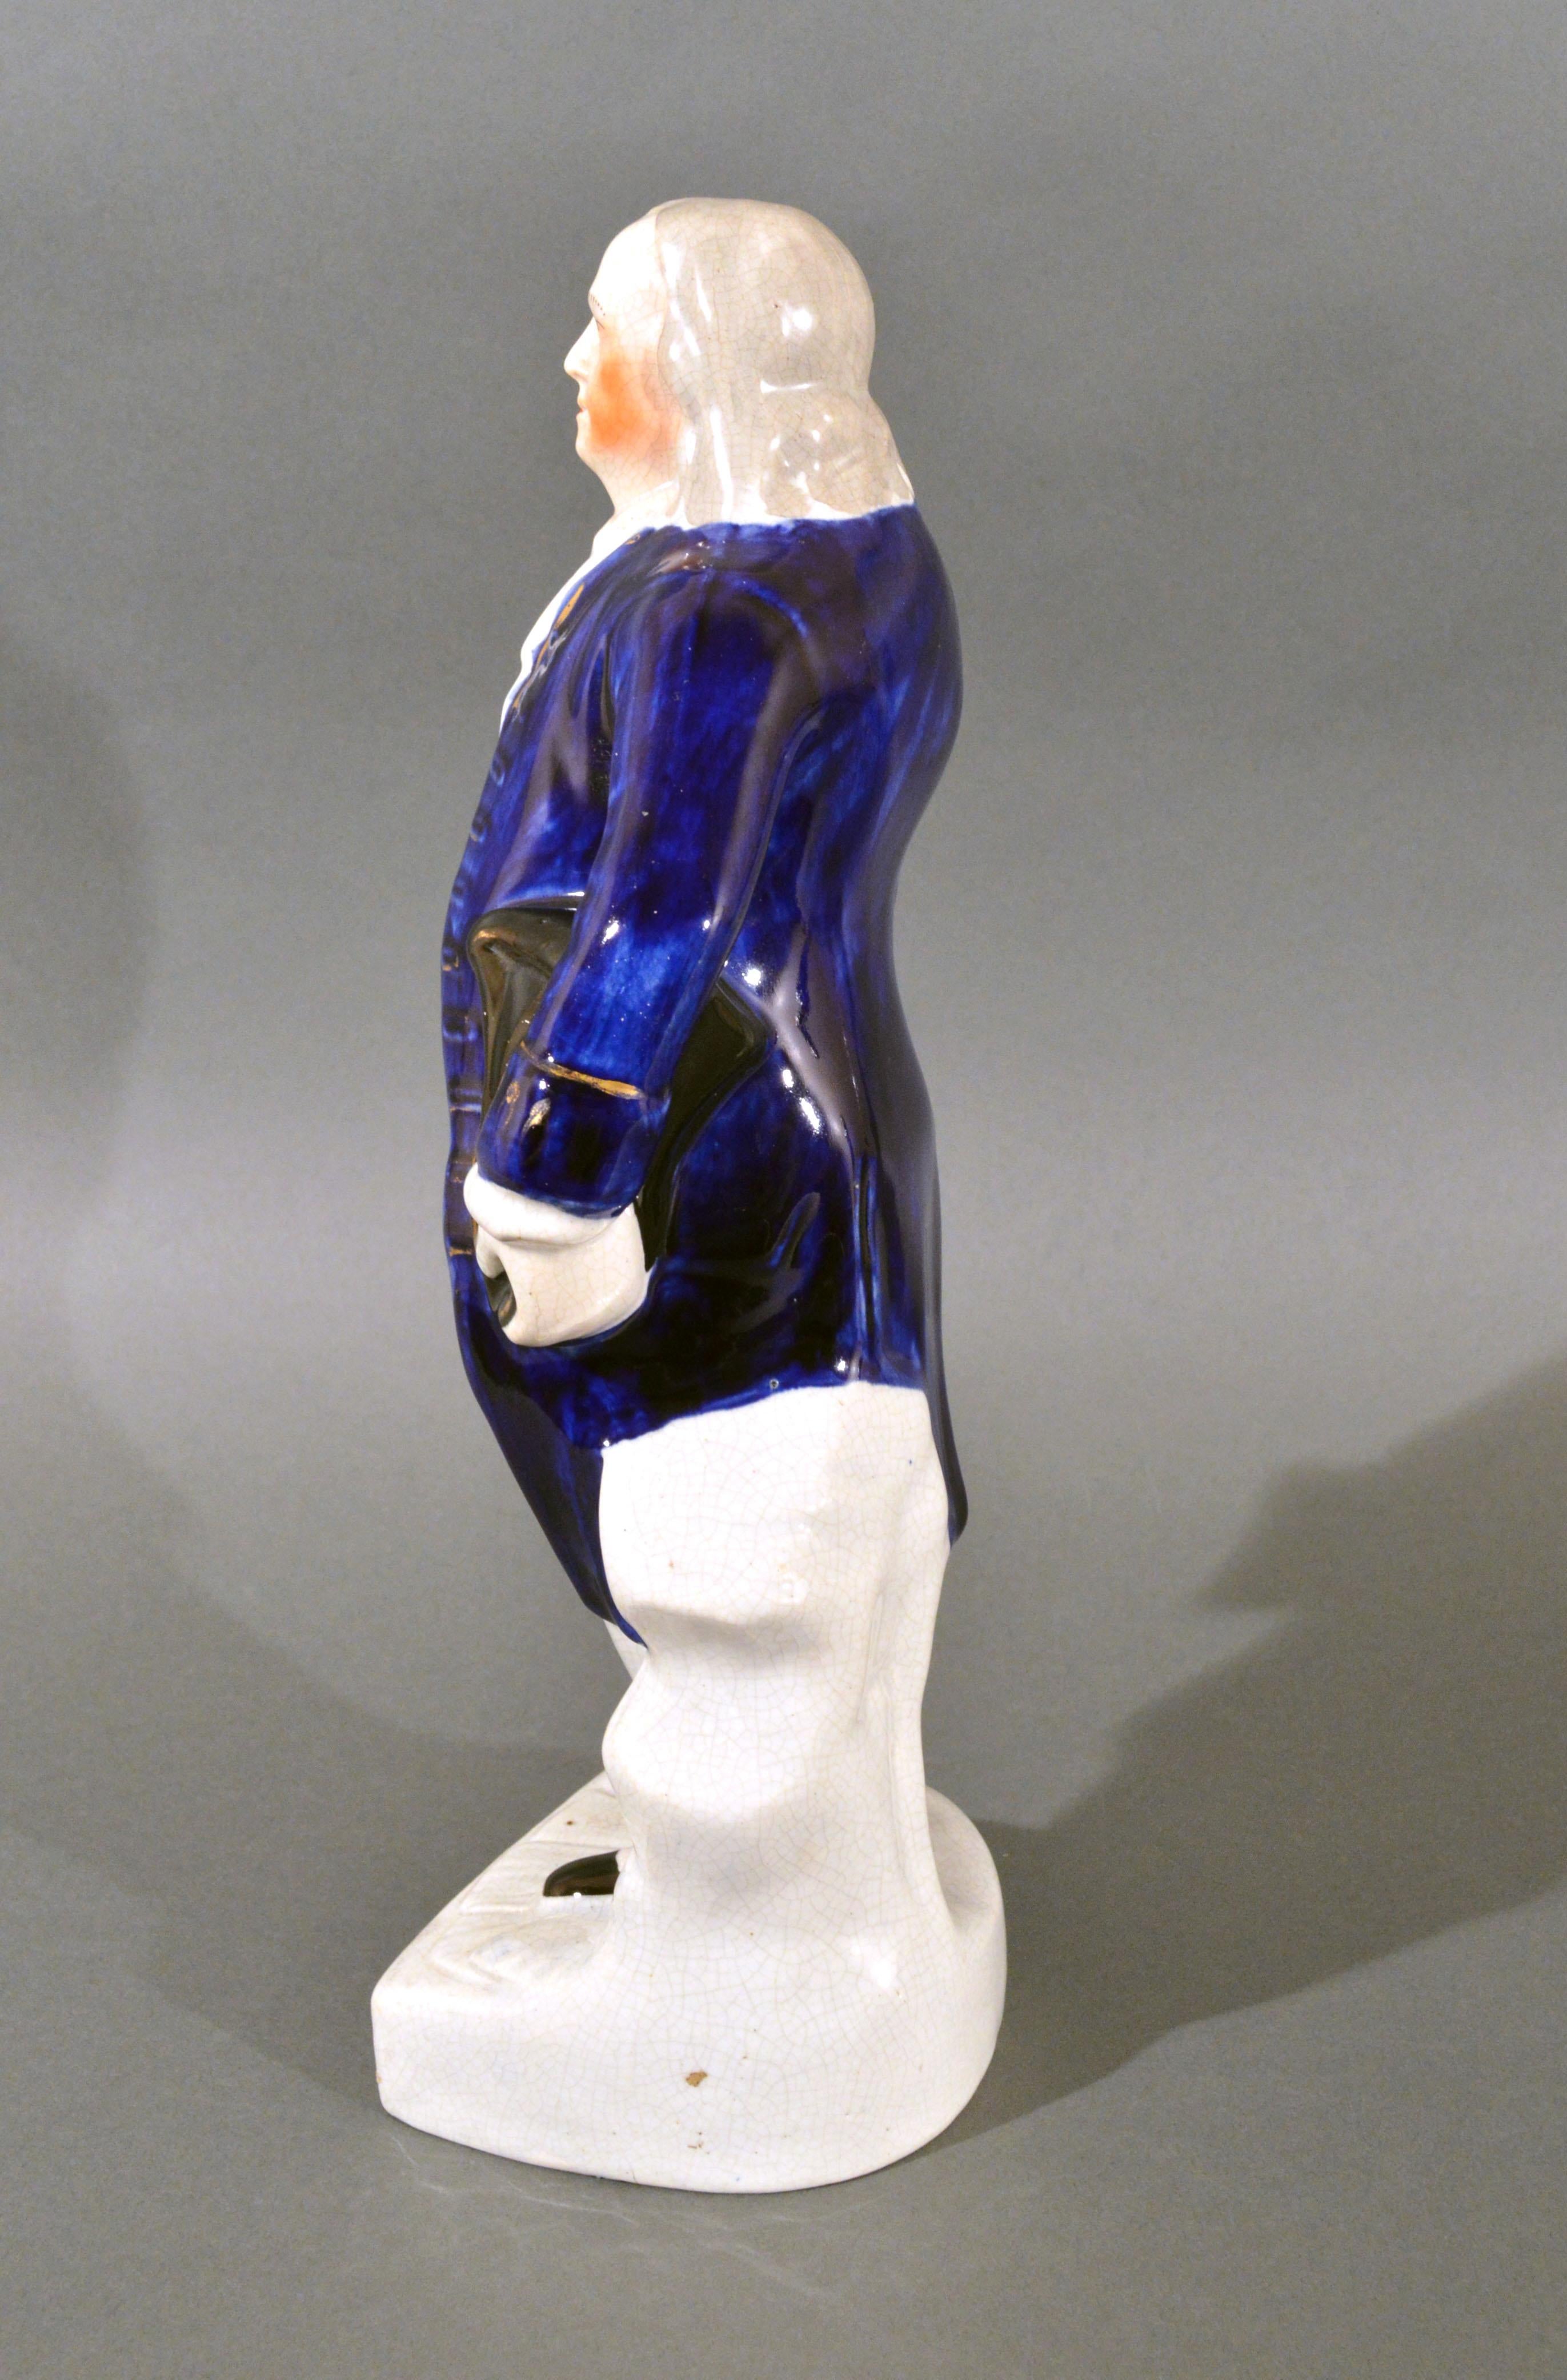 American Classical Staffordshire Pottery Figure of Benjamin Franklin, Named on Base For Sale